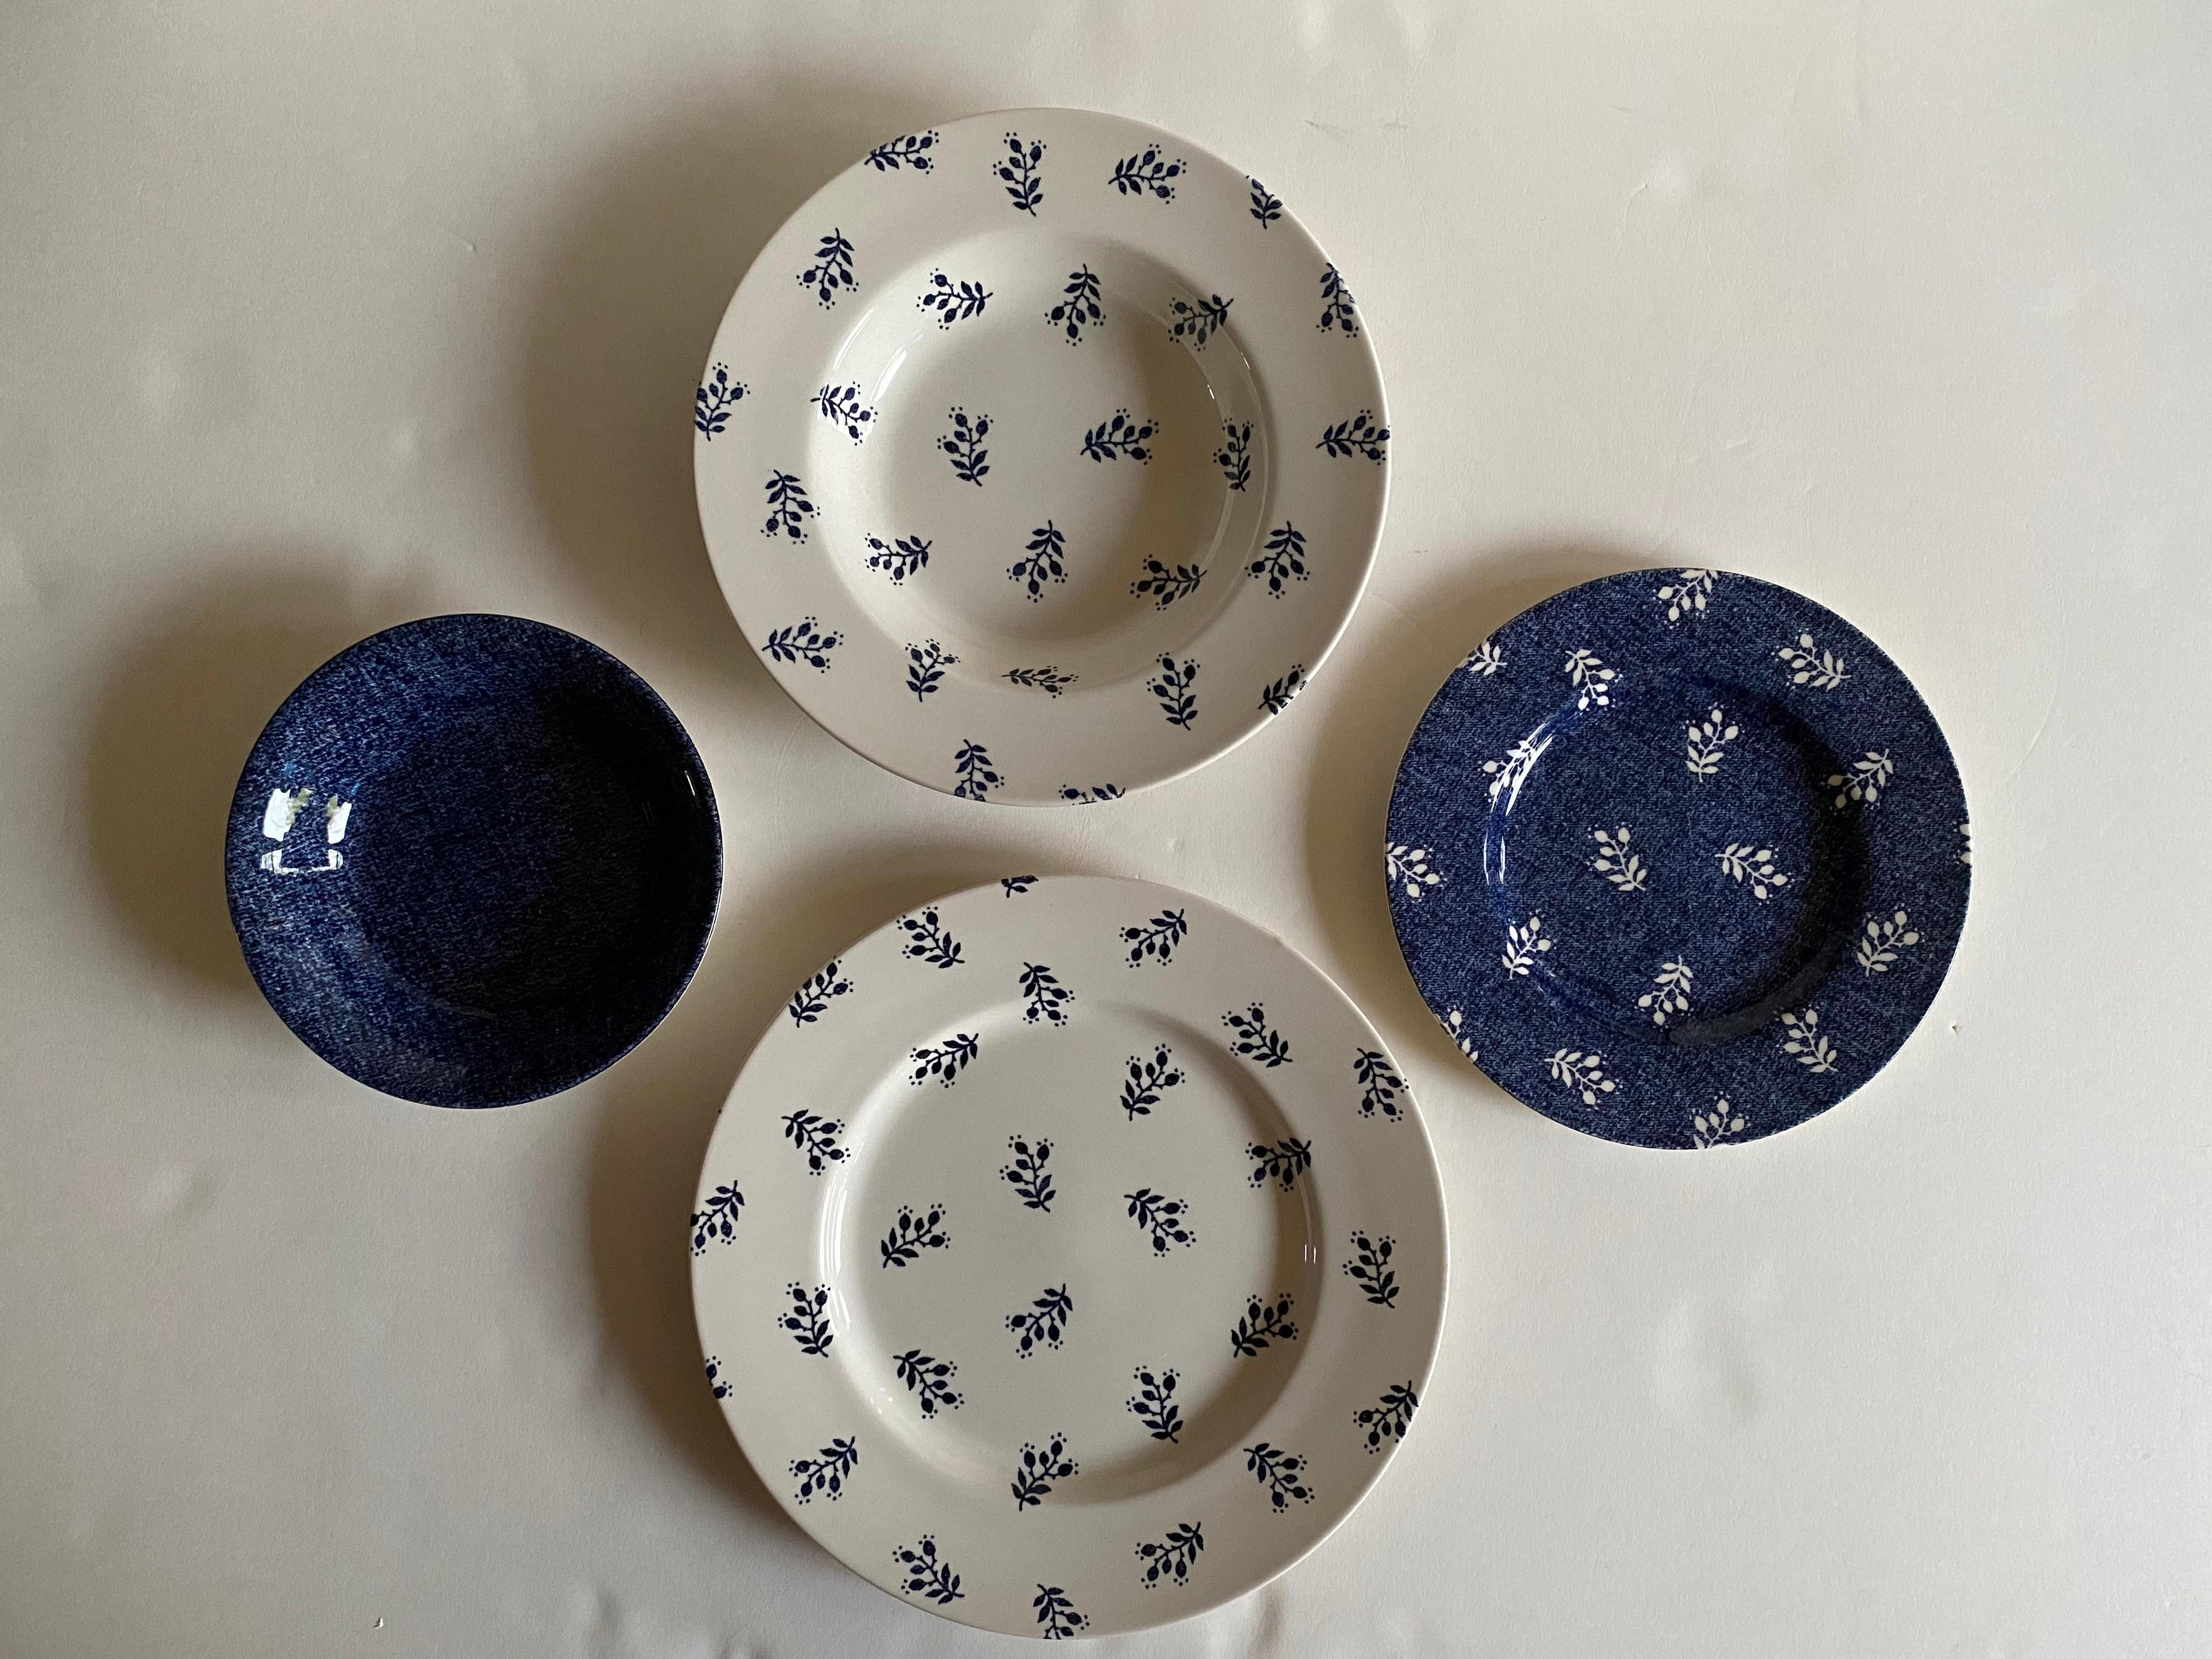 A 16-piece dinnerware set from the RL Denimware collection by Ralph Lauren Home.

Signed. Made in England, 1997 to 1999.

Includes 4 place settings, each having 4 pieces for a total of 16 pieces detailed below;

4 dinner plates in the Kate